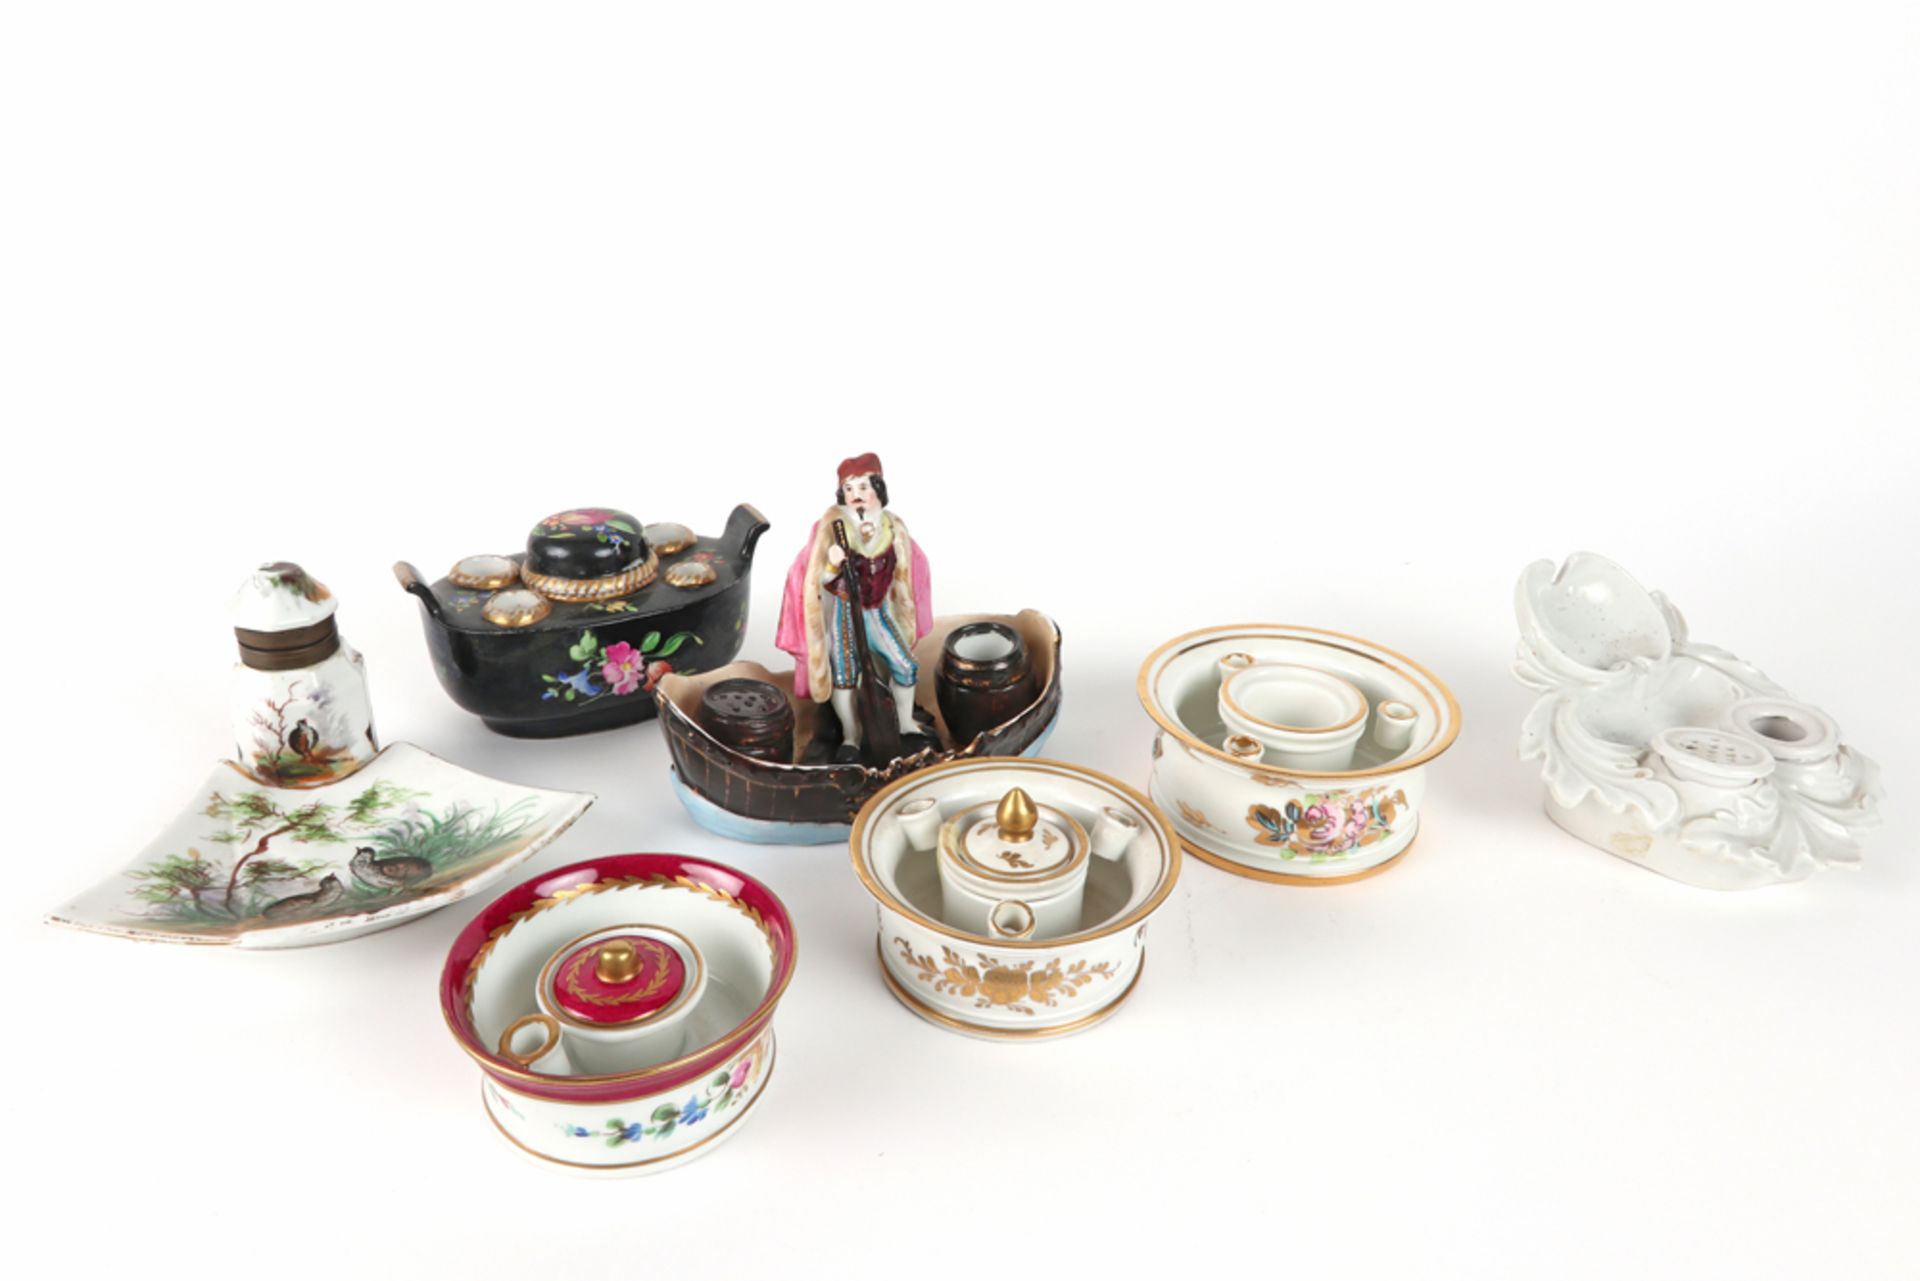 seven antique and old inkstands in porcelain, one with a figure standing in a boat